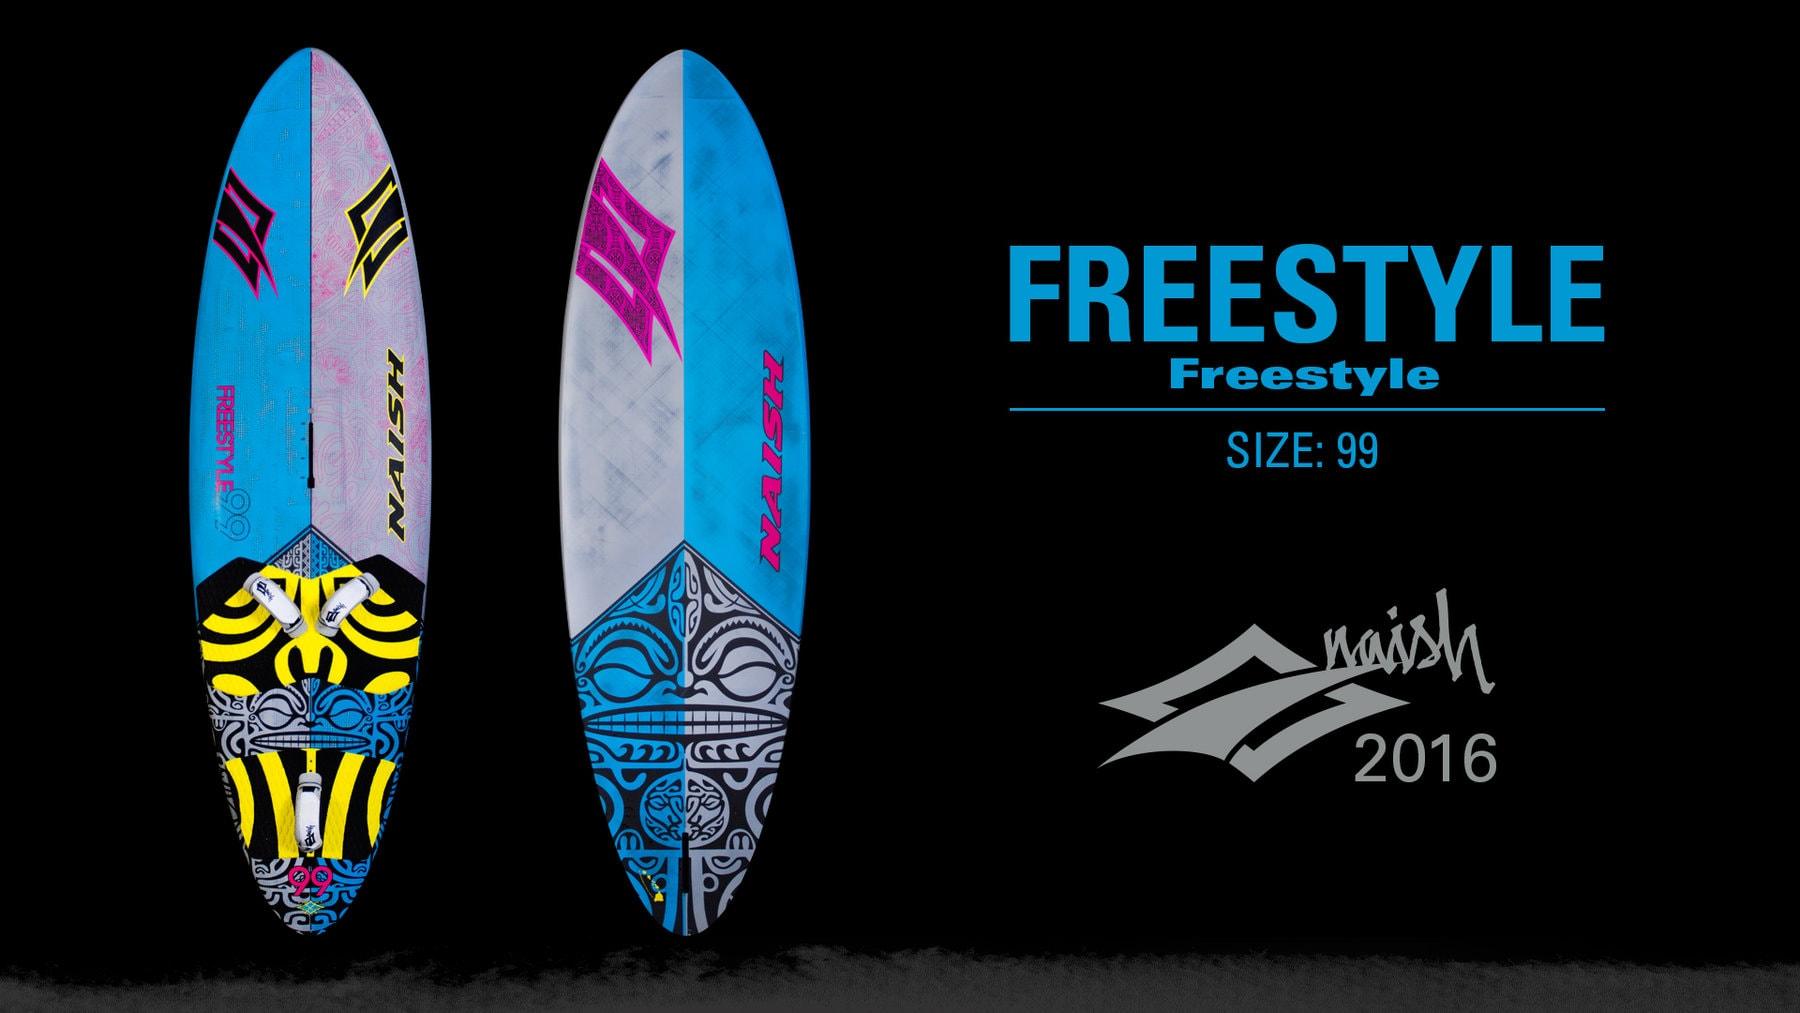 Freestyle - Product Video - Naish.com